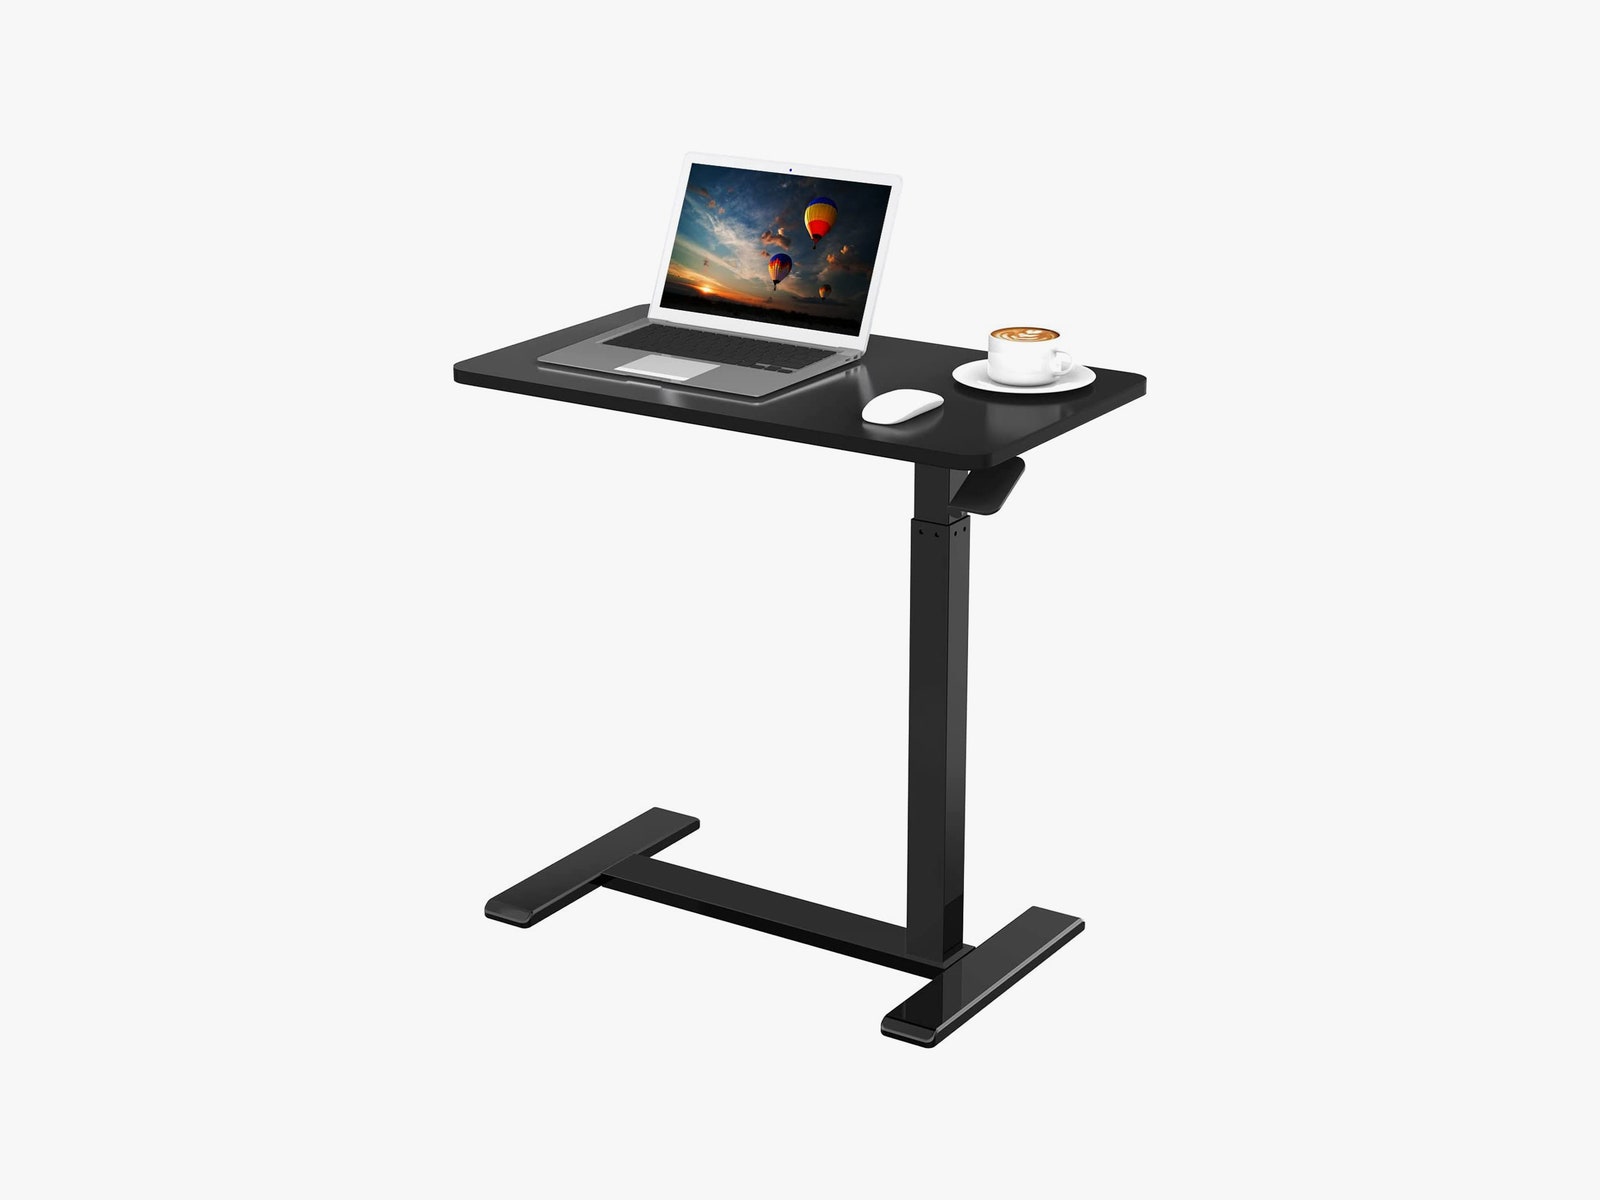 Flexispot Adjustable Table with laptop computer mouse and cup of coffee on top.